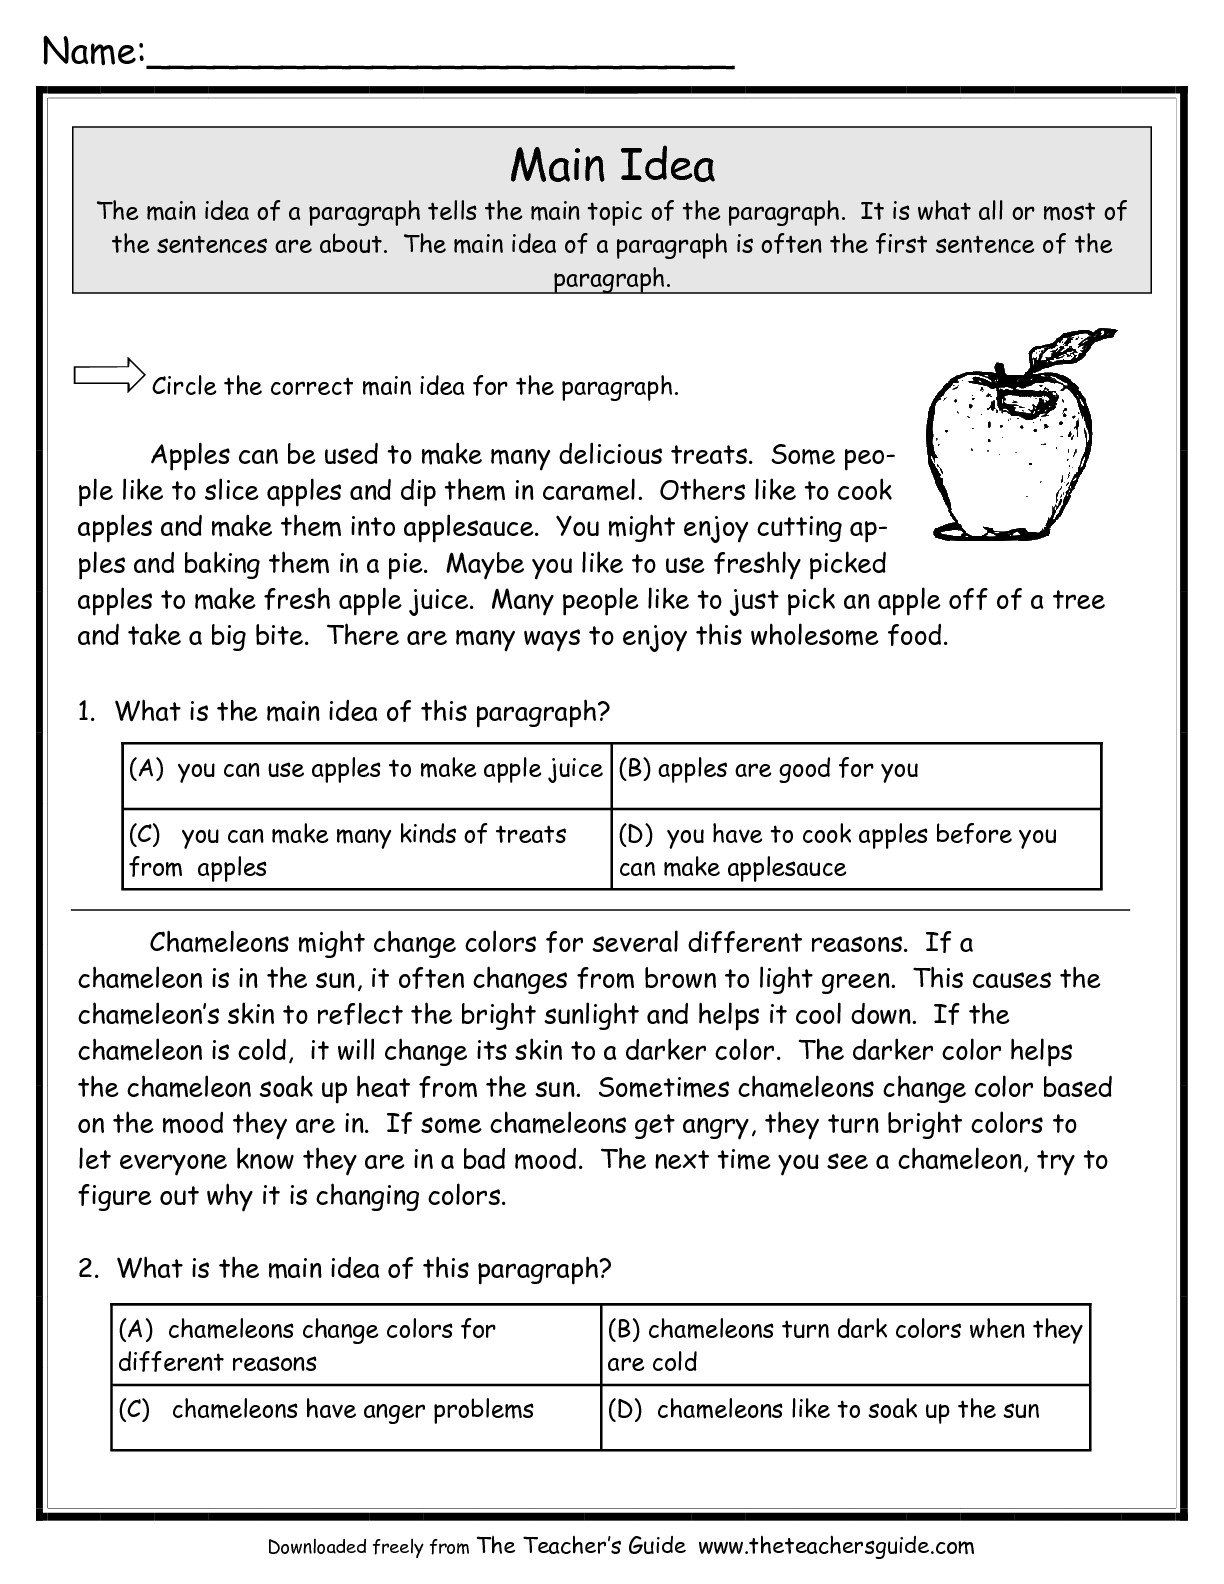 main-idea-and-details-worksheets-4th-grade